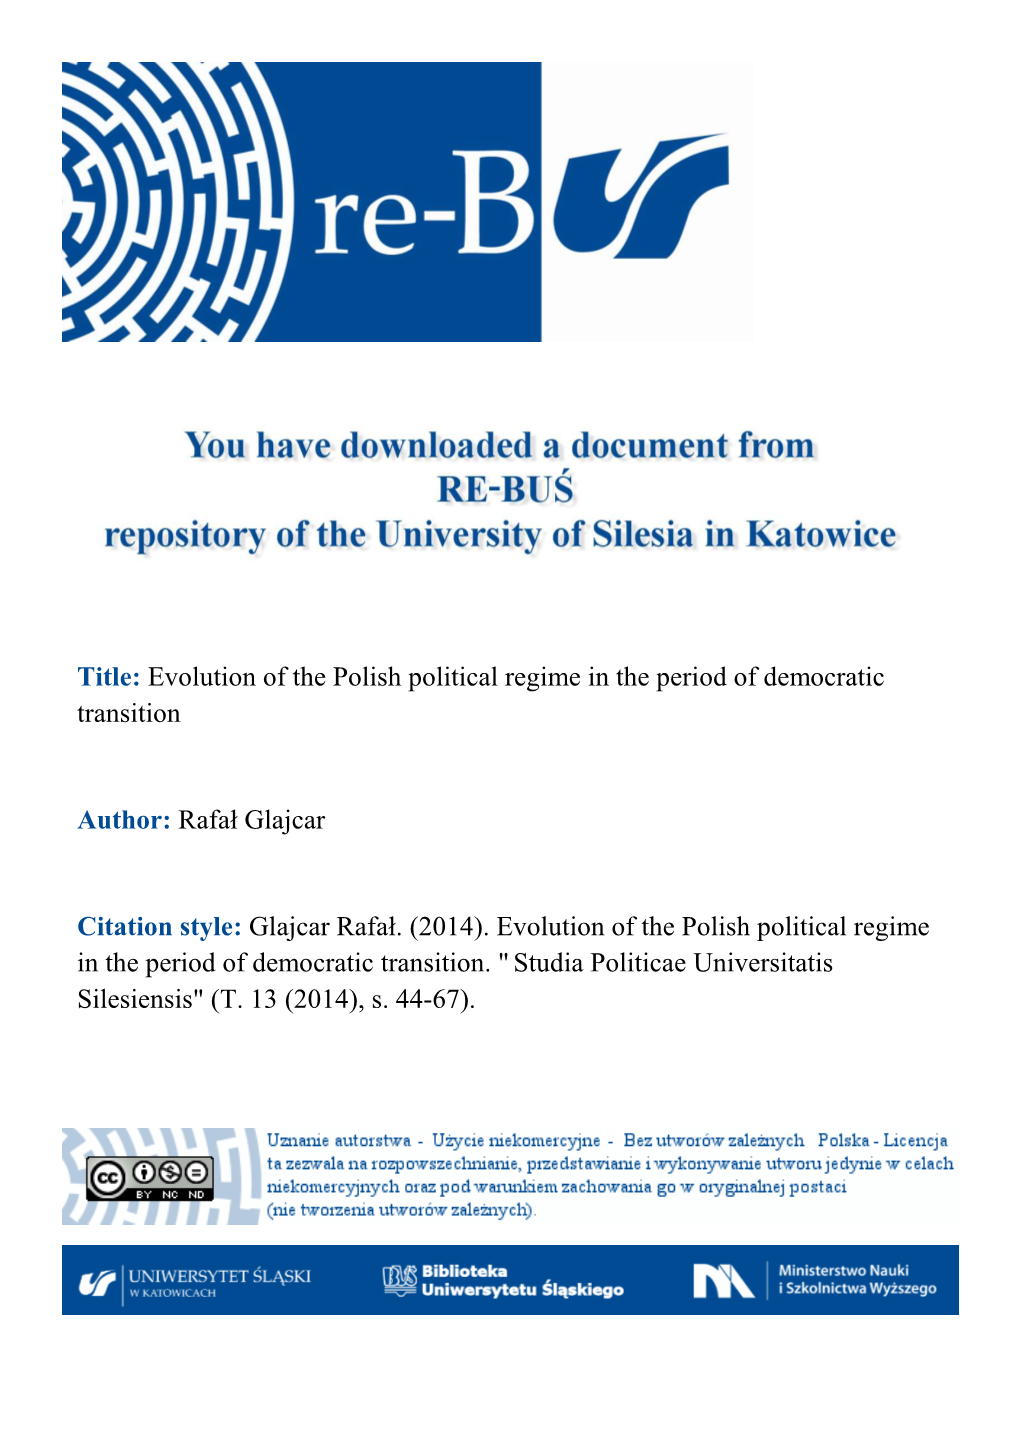 Title: Evolution of the Polish Political Regime in the Period of Democratic Transition Author: Rafał Glajcar Citation Style: Gl